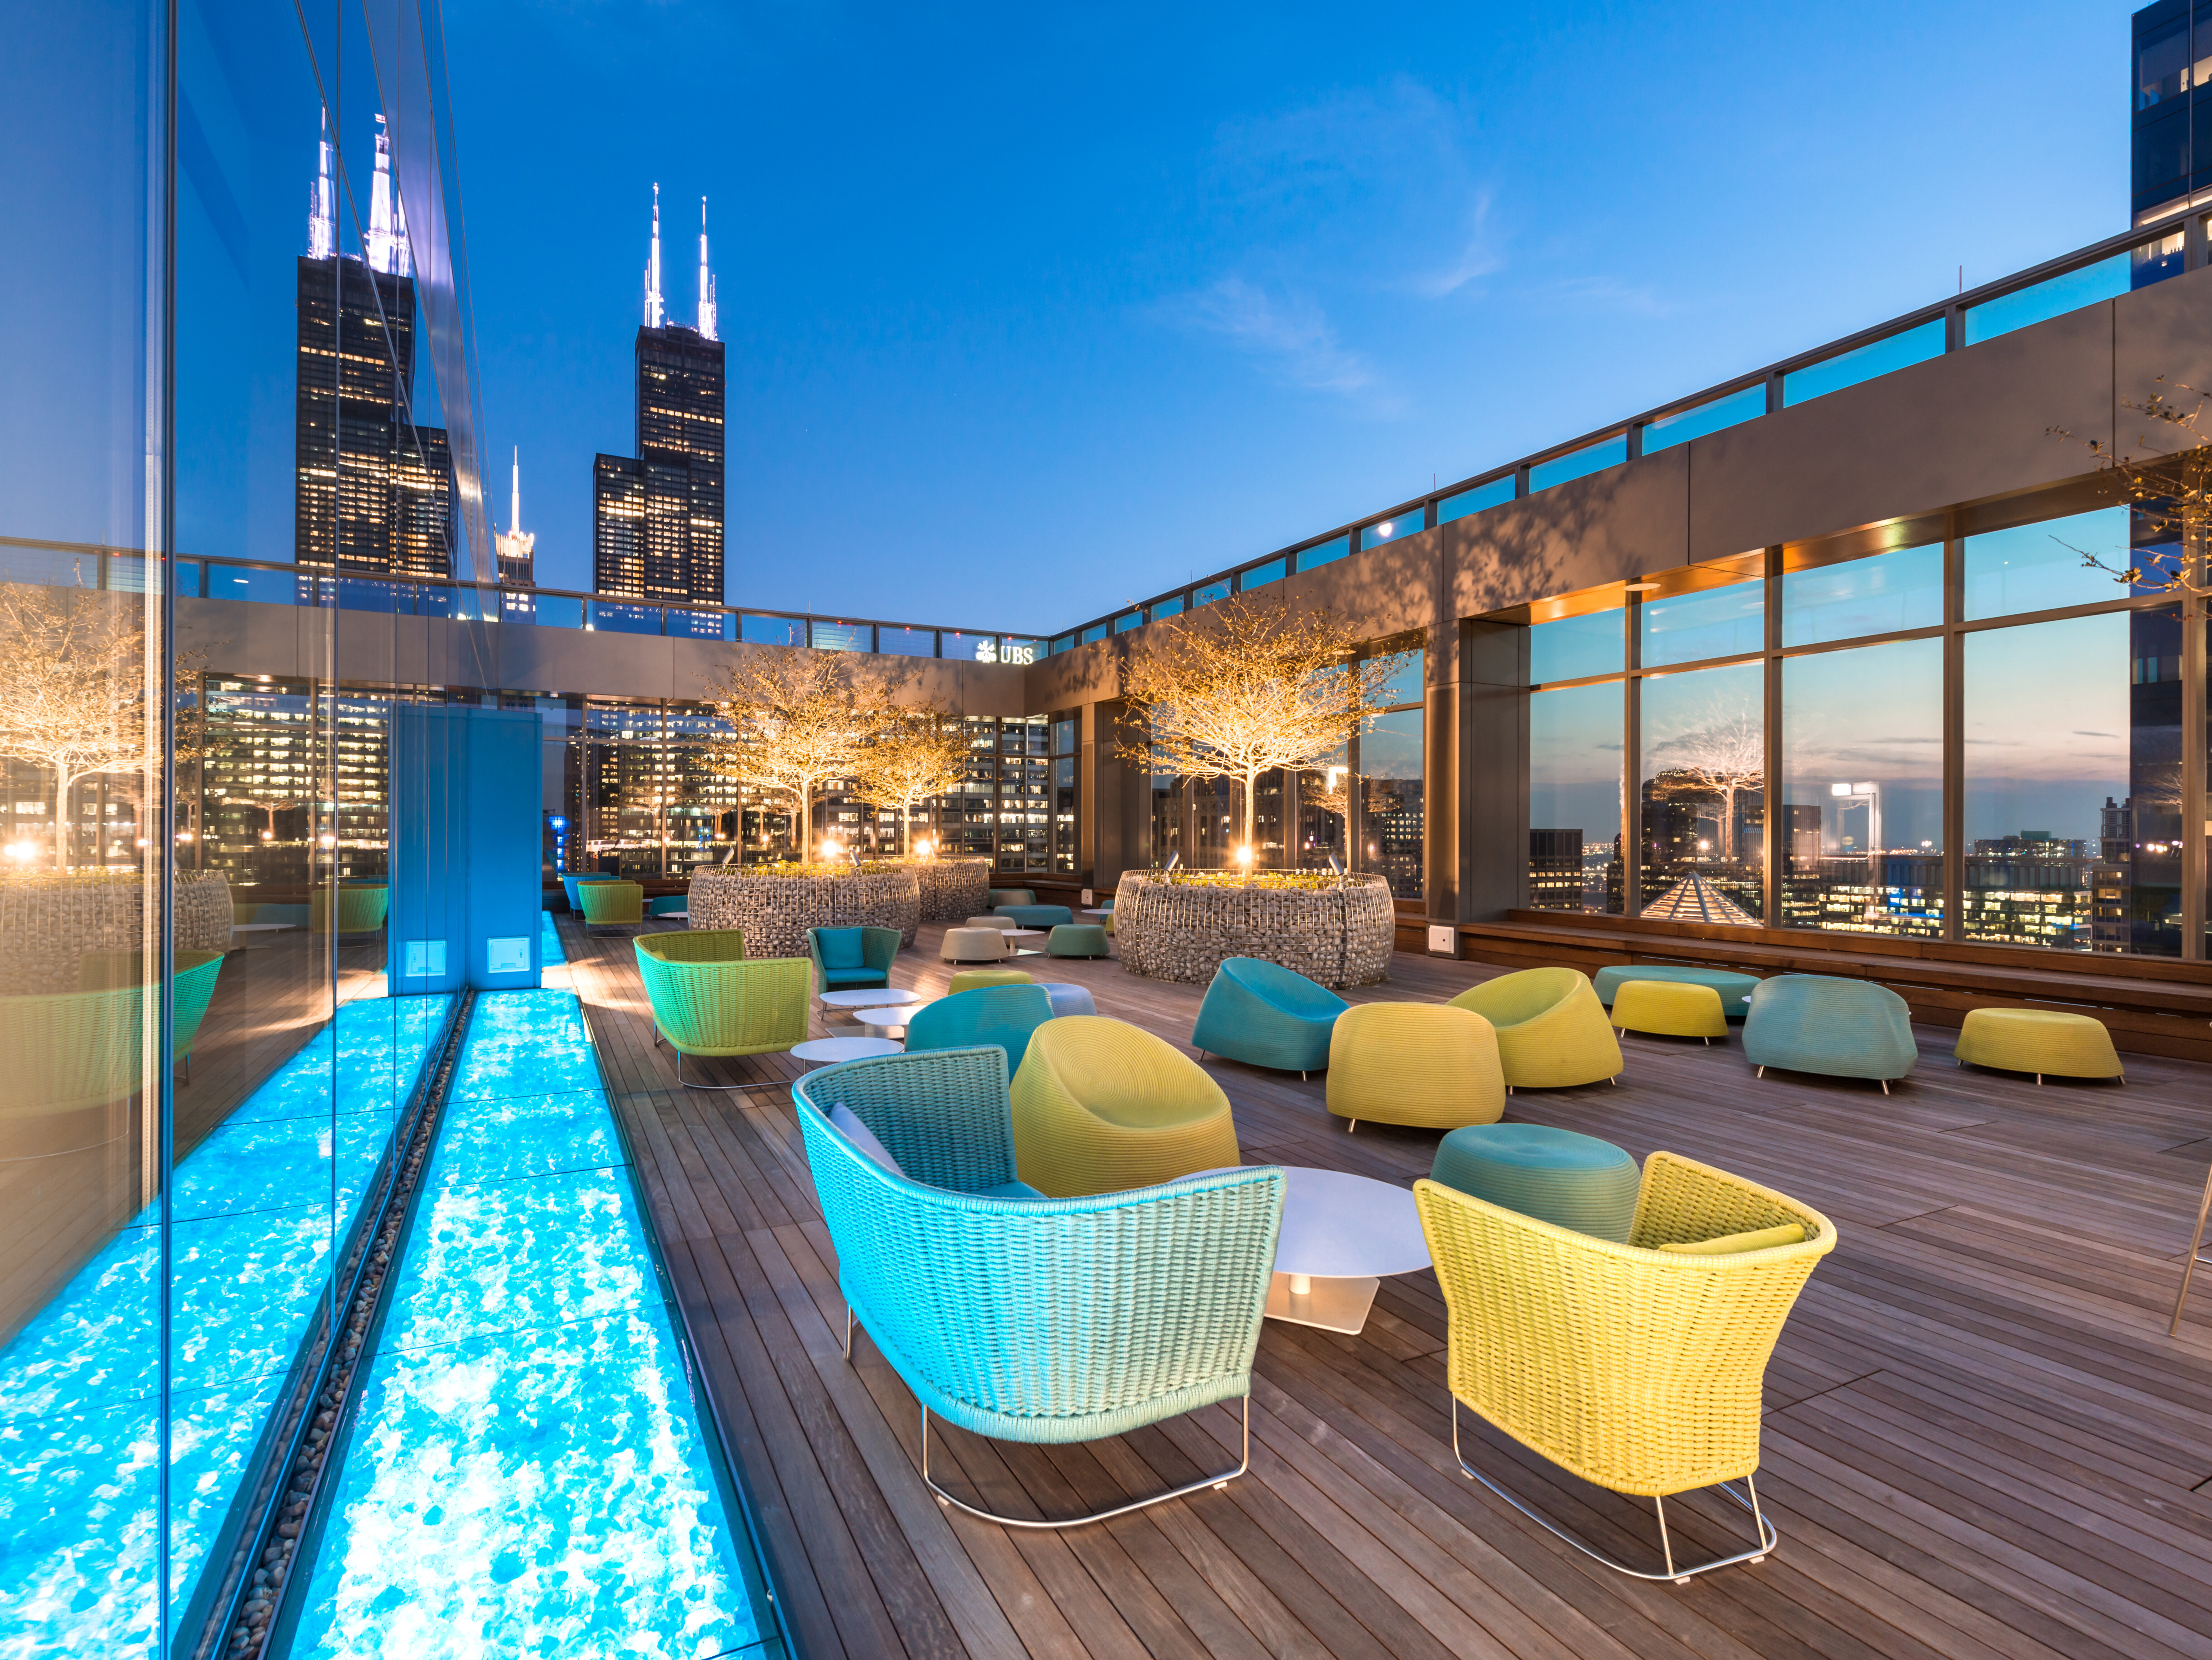 CNA office patio space with downtown Chicago skyline view at dusk